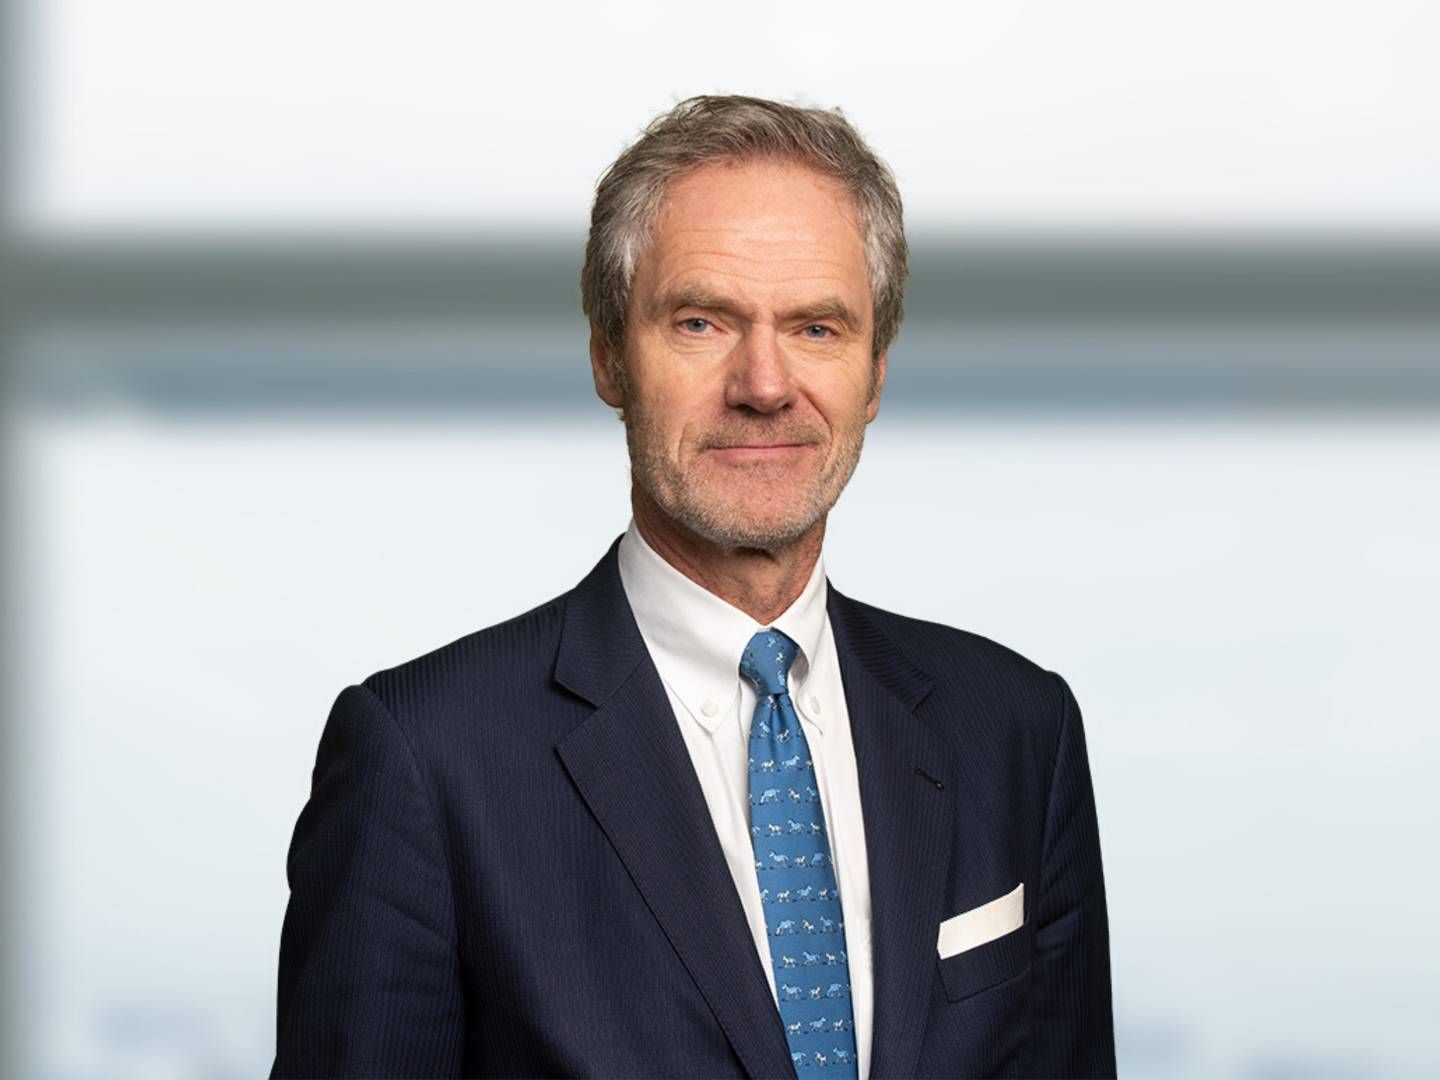 Anders Onarheim has been with BW LPG for 12 years. The last three of these as its CEO. He will resign at the end of September. | Photo: Bw Lpg